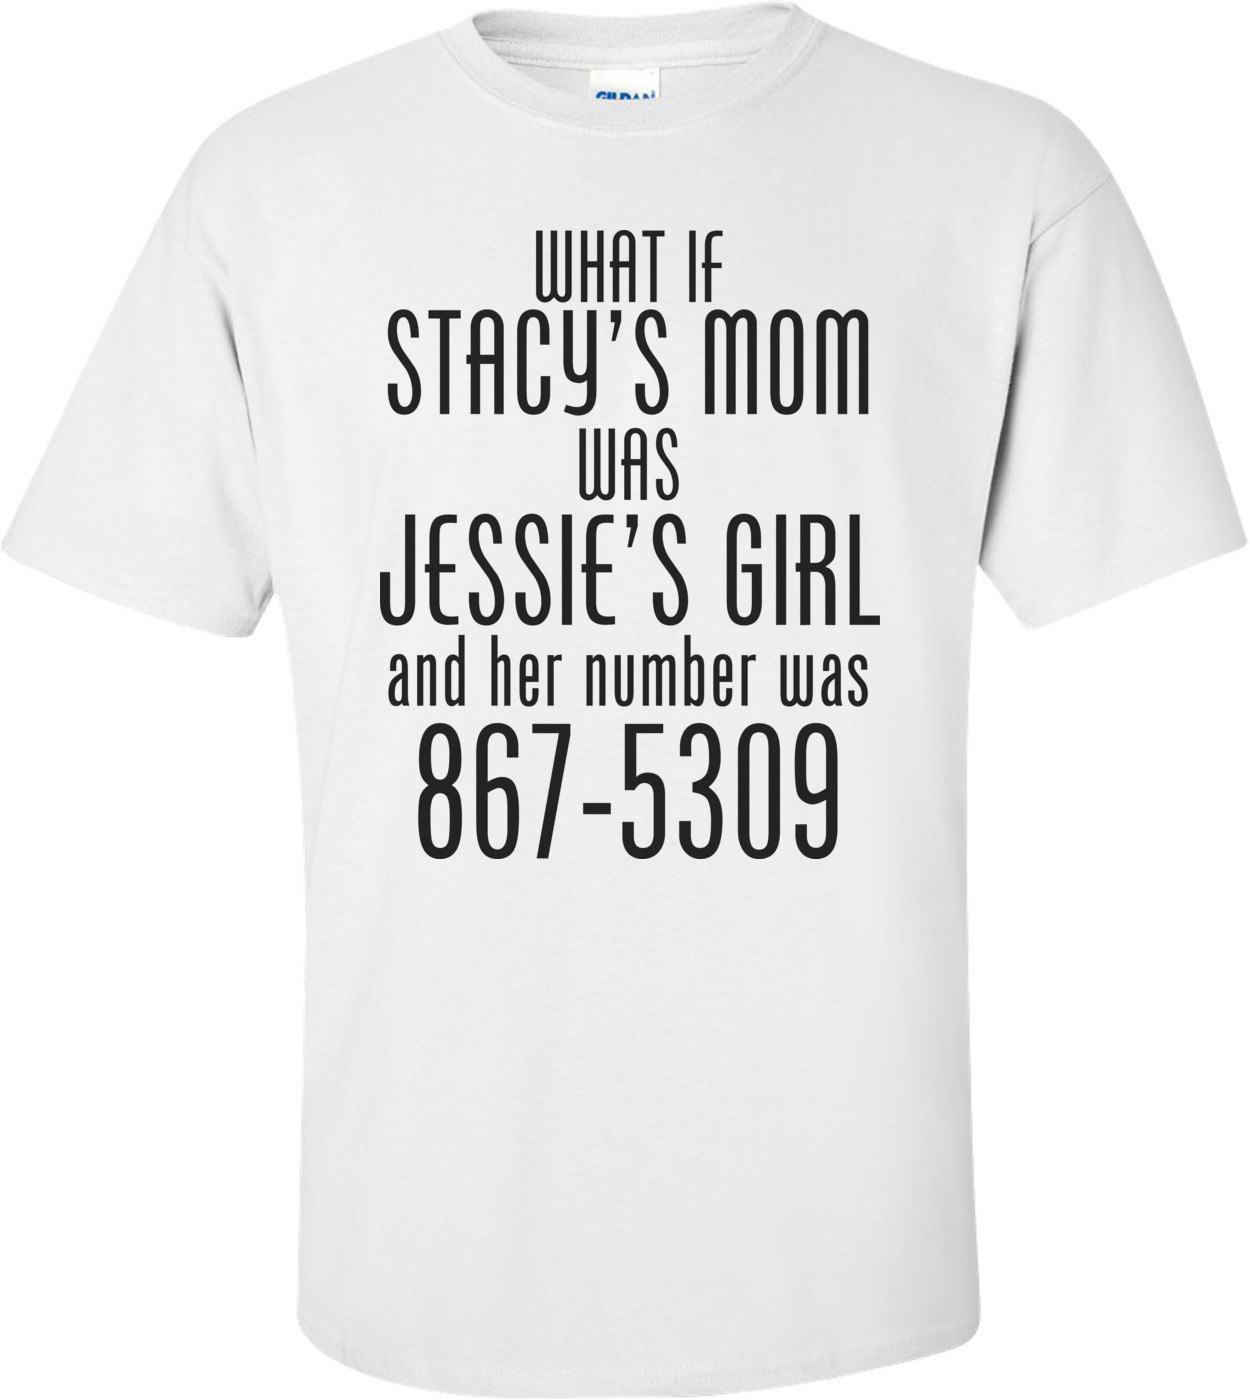 What If Stacy's Mom Was Jessie's Girl Funny Shirt